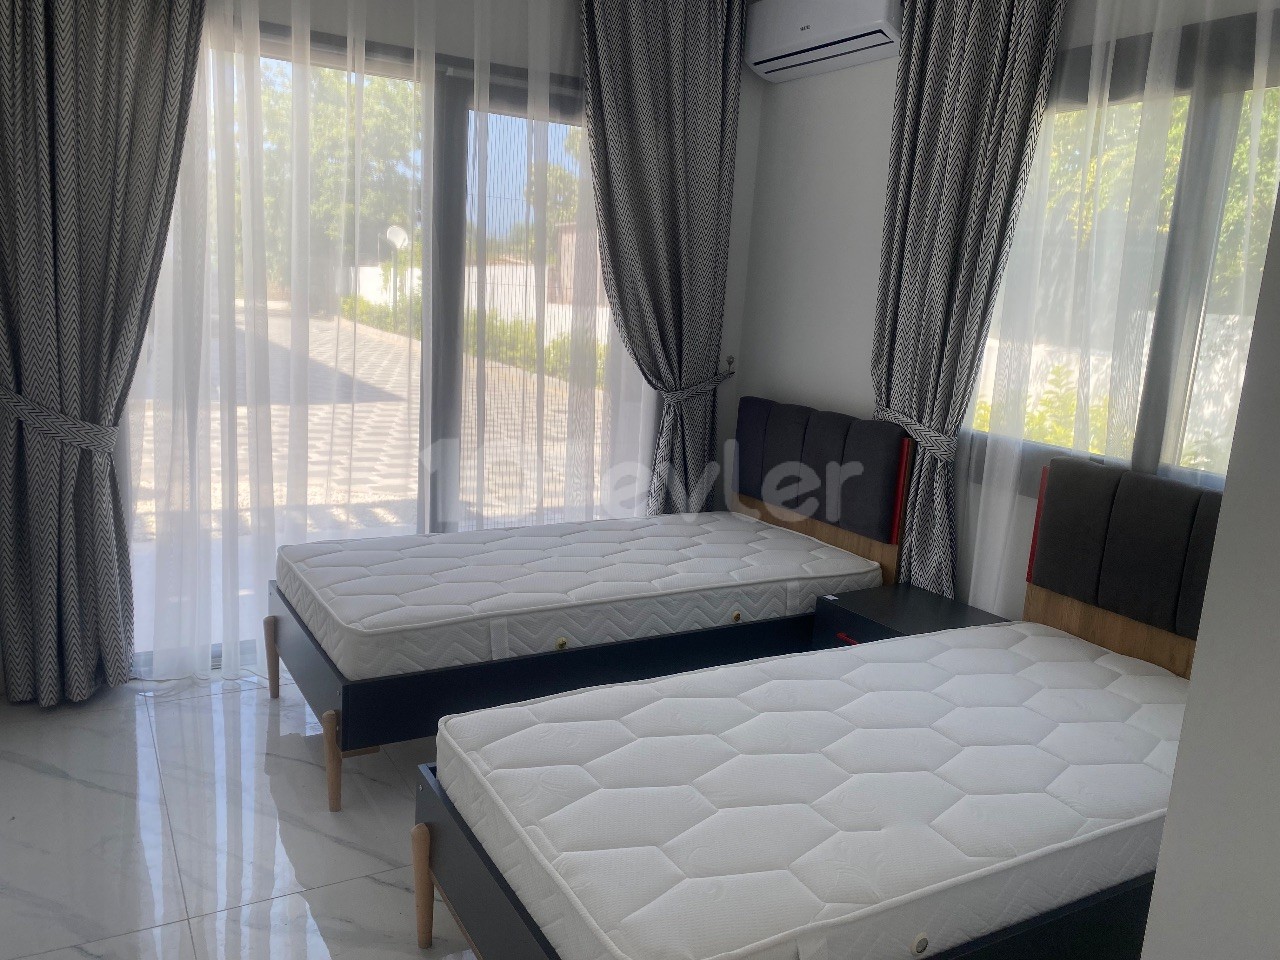 2+1 Flat for Rent in a Complex with Pool in Alsancak, Kyrenia